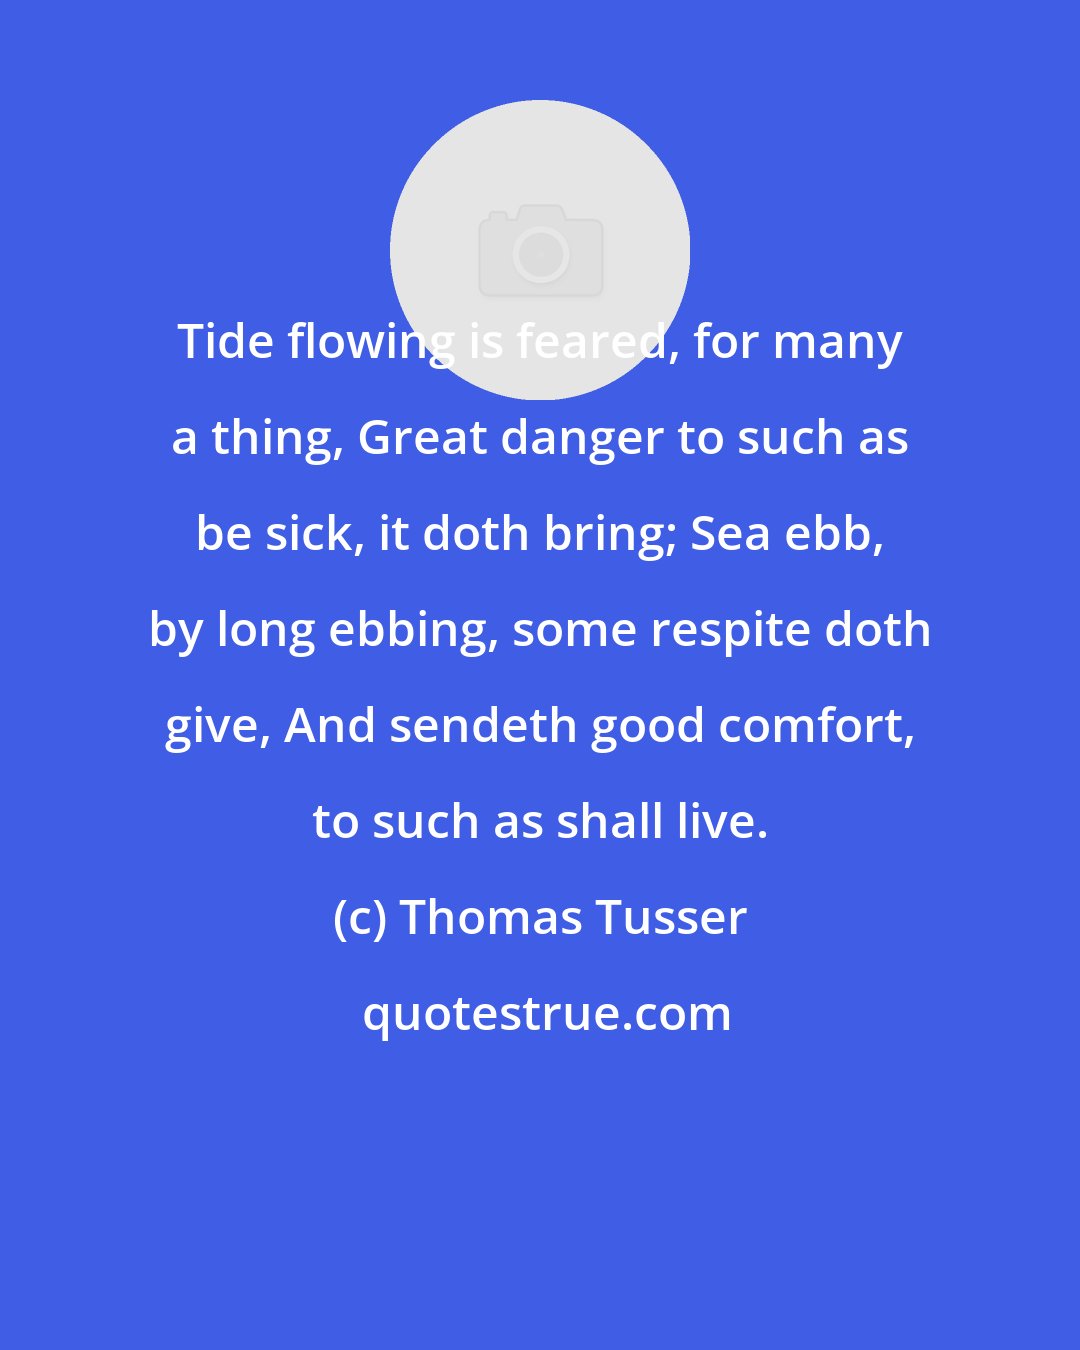 Thomas Tusser: Tide flowing is feared, for many a thing, Great danger to such as be sick, it doth bring; Sea ebb, by long ebbing, some respite doth give, And sendeth good comfort, to such as shall live.